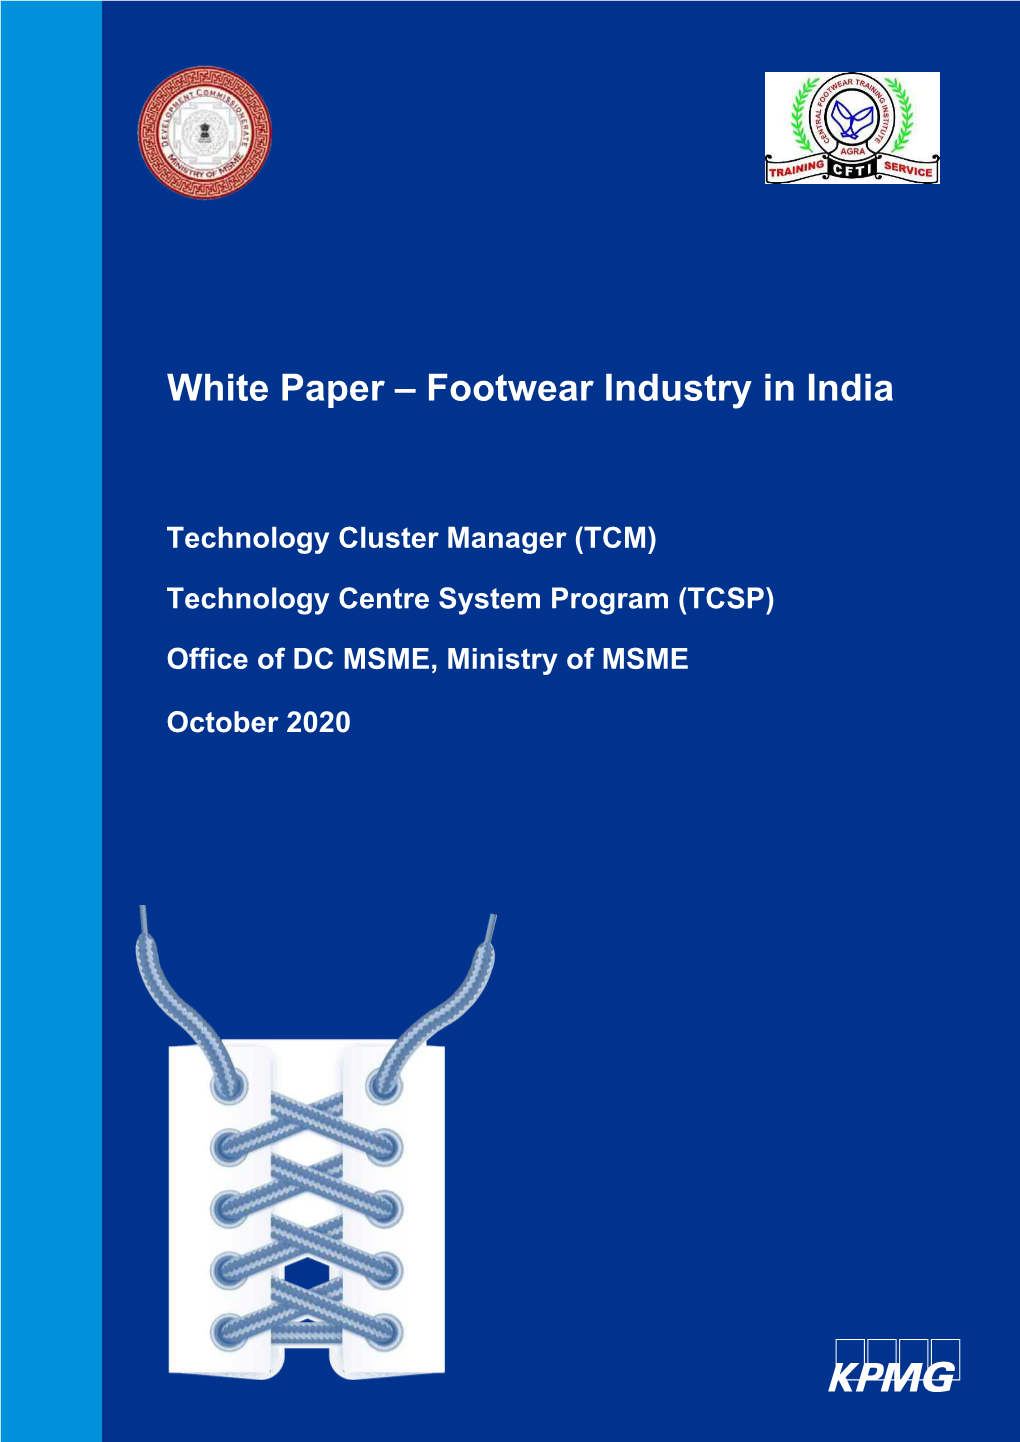 White Paper – Footwear Industry in India